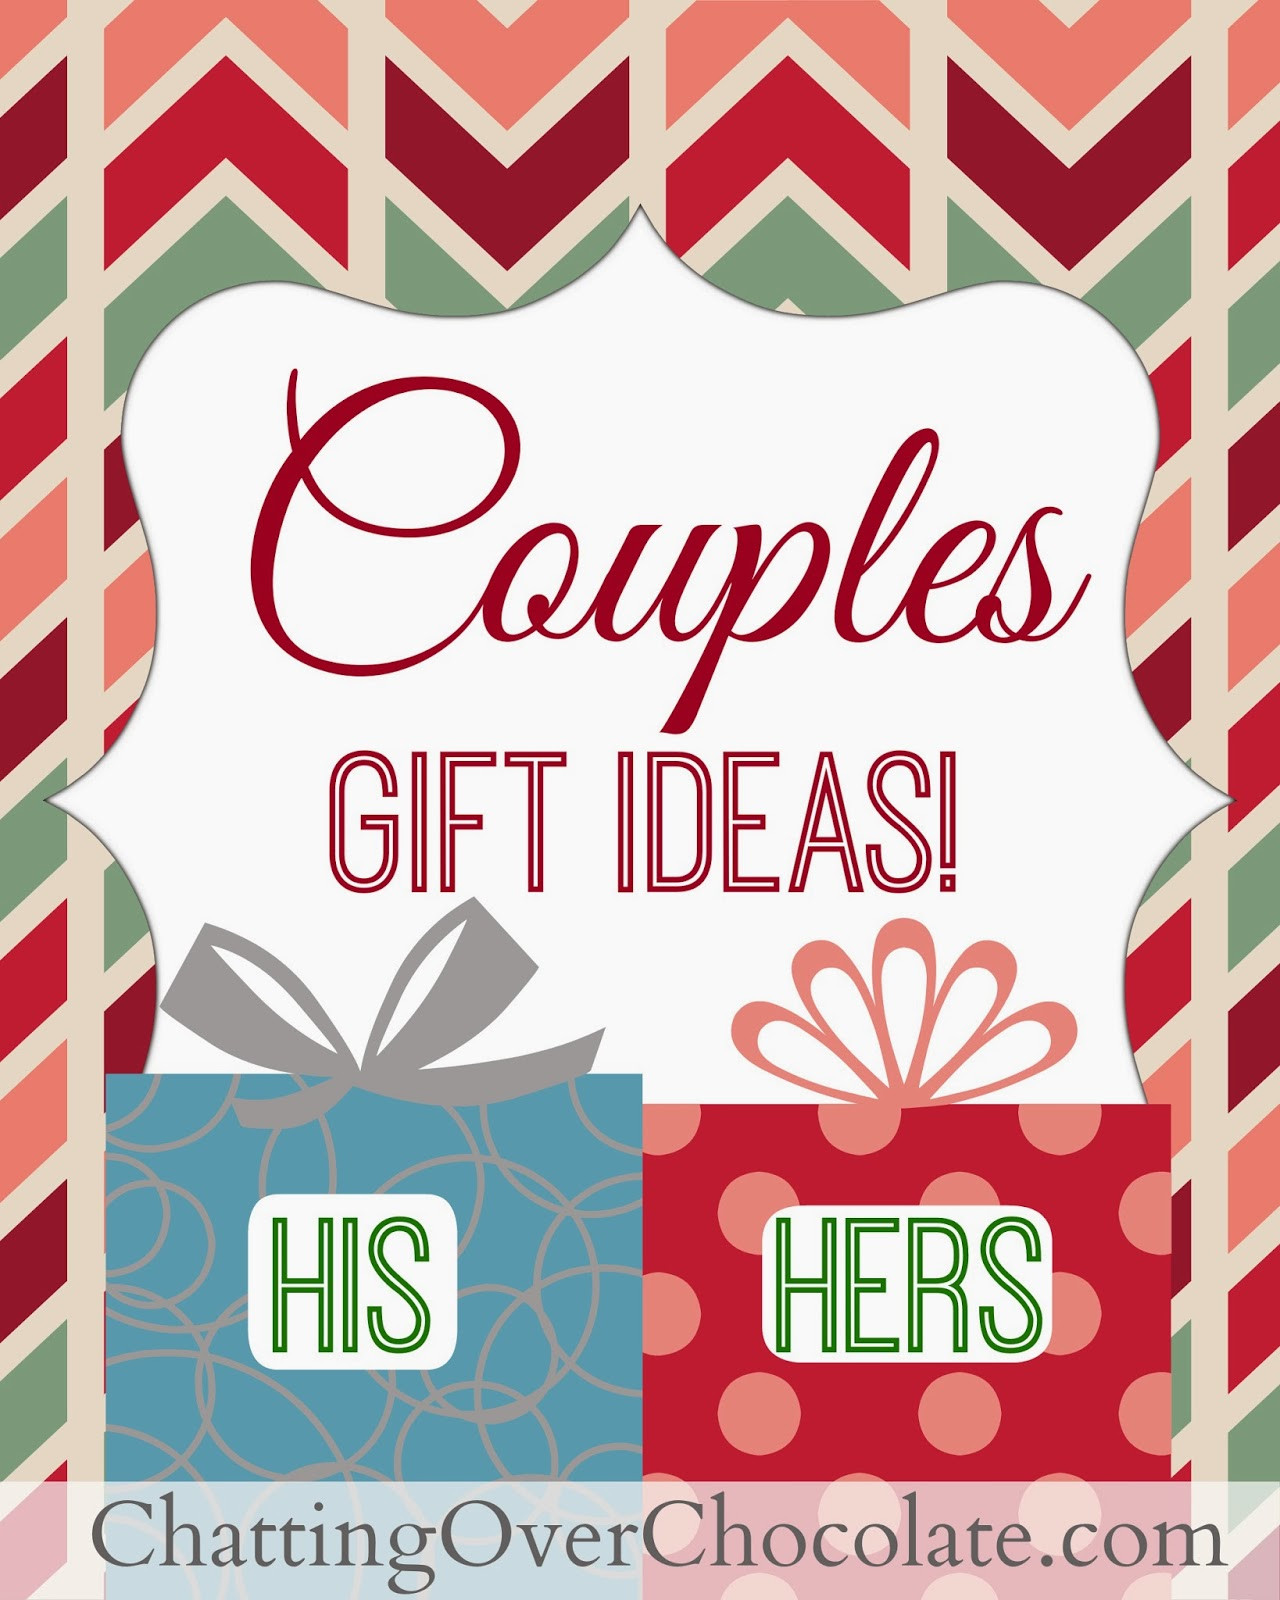 Christmas Gift Ideas For Married Couples
 Chatting Over Chocolate His & Hers Gift Ideas Couples